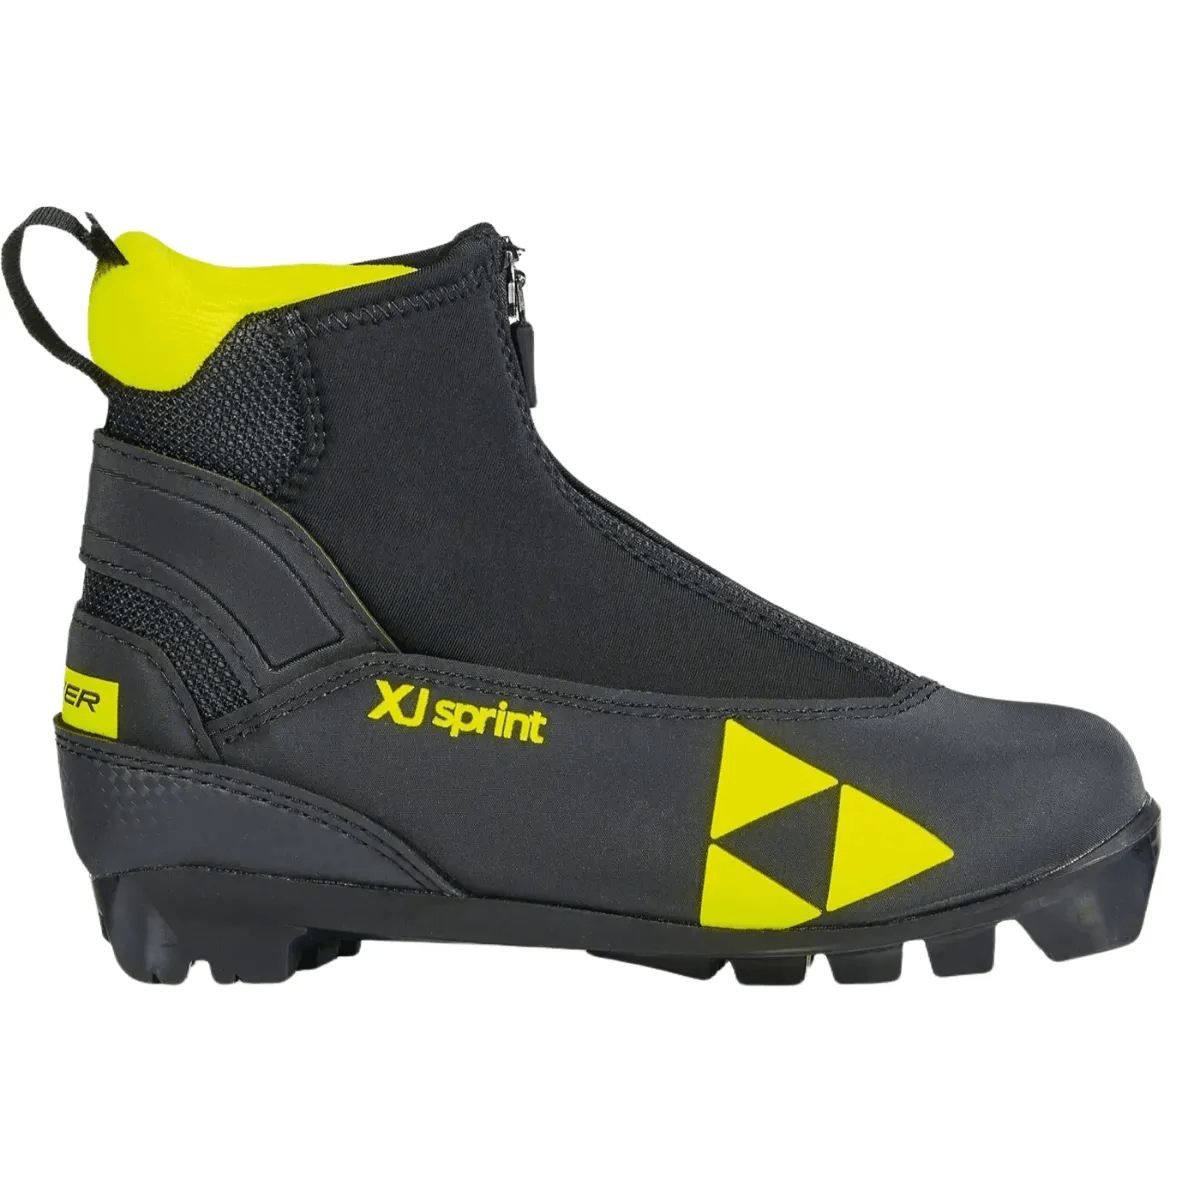 Fischer XJ Sprint Cross Country Ski Boot - Youth